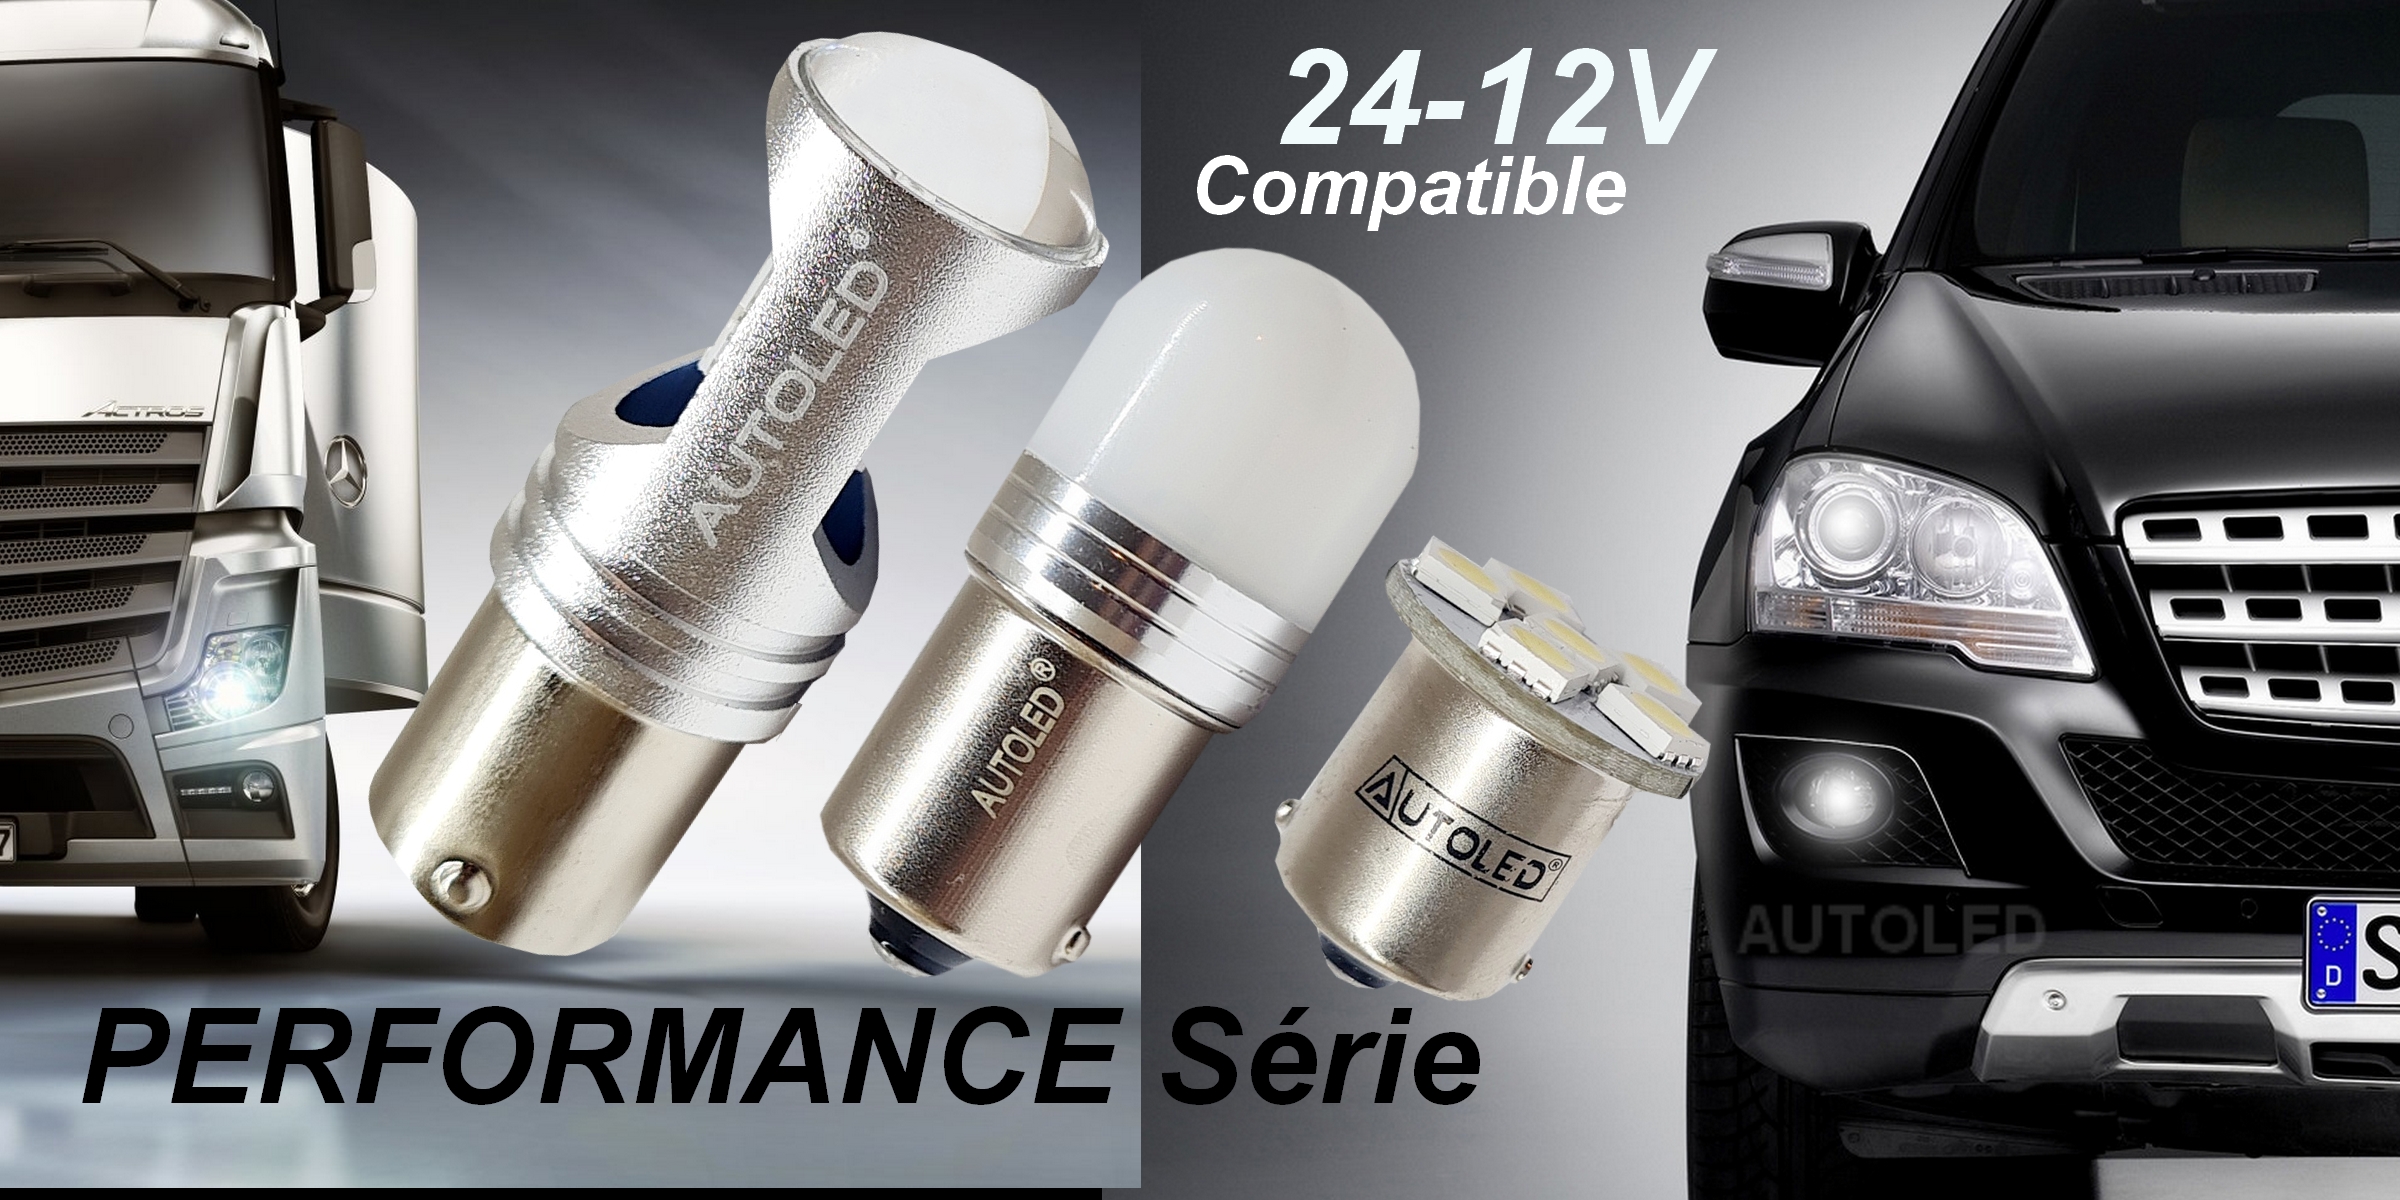 gamme ampoule performance serie autoled-0300-1